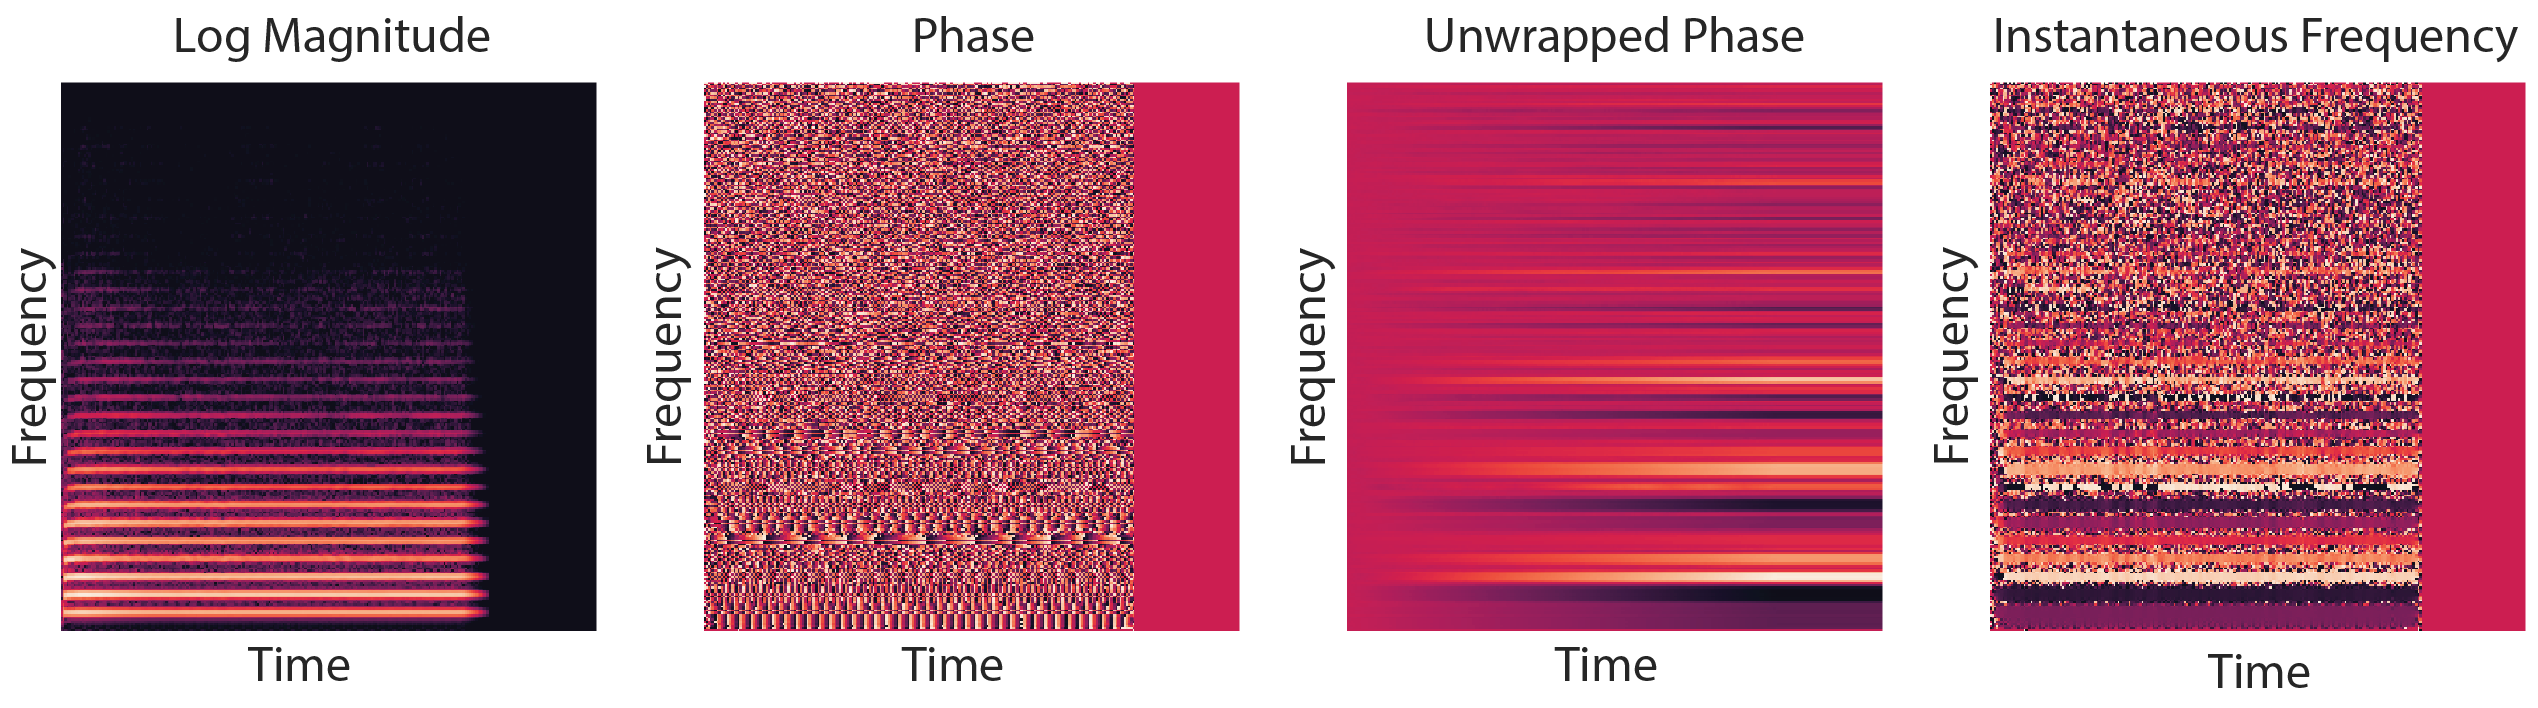 Visualisations of the magnitude, phase, unwrapped phase and instantaneous frequency spectra of a real recording of a note.